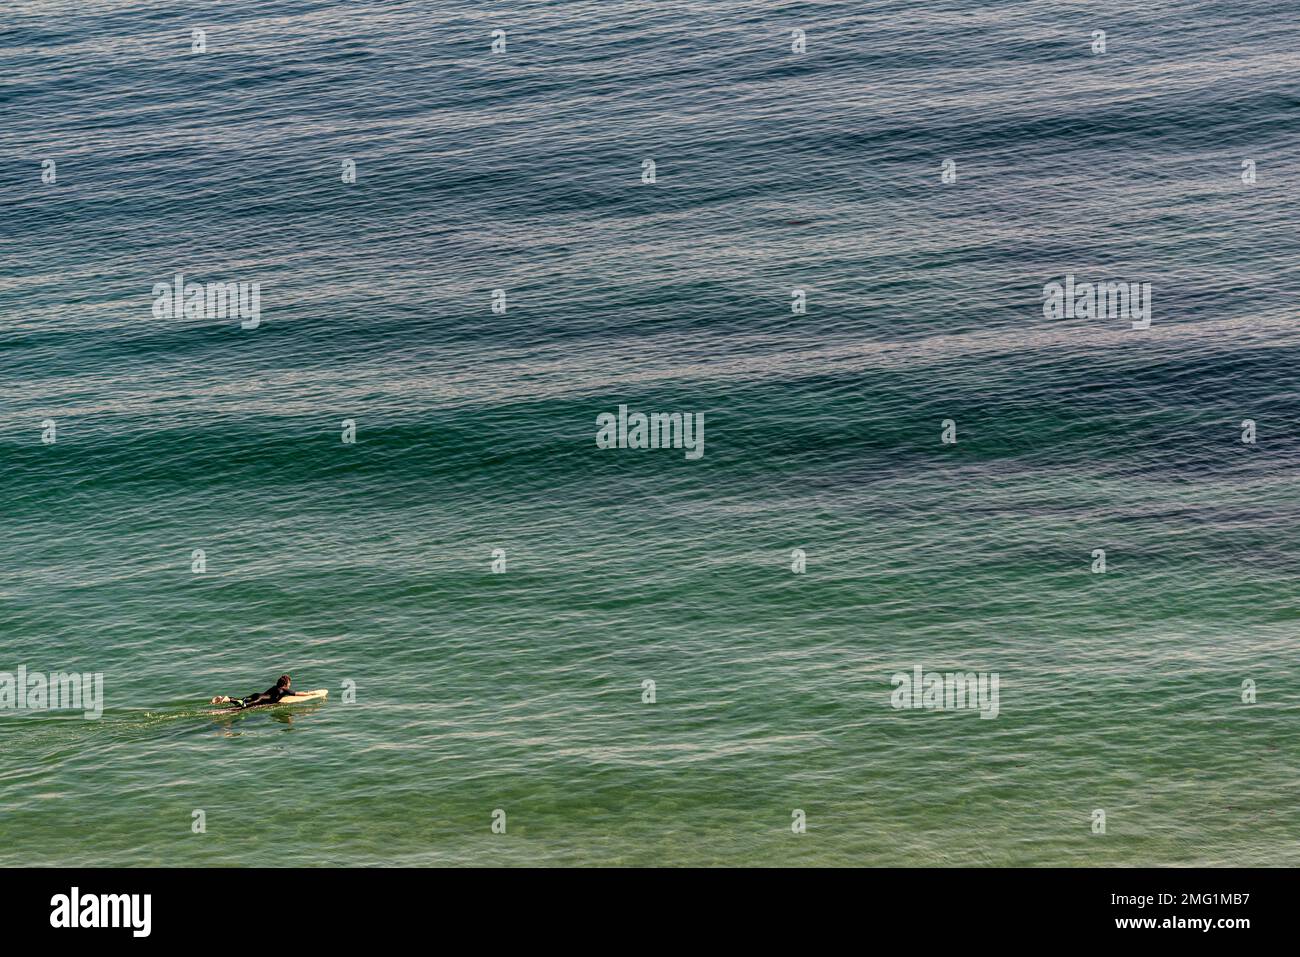 A man in the sea practicing the sport of surfing on the beach of Langre in the province of Santander, autonomous community of Cantabria, Spain, Europe Stock Photo